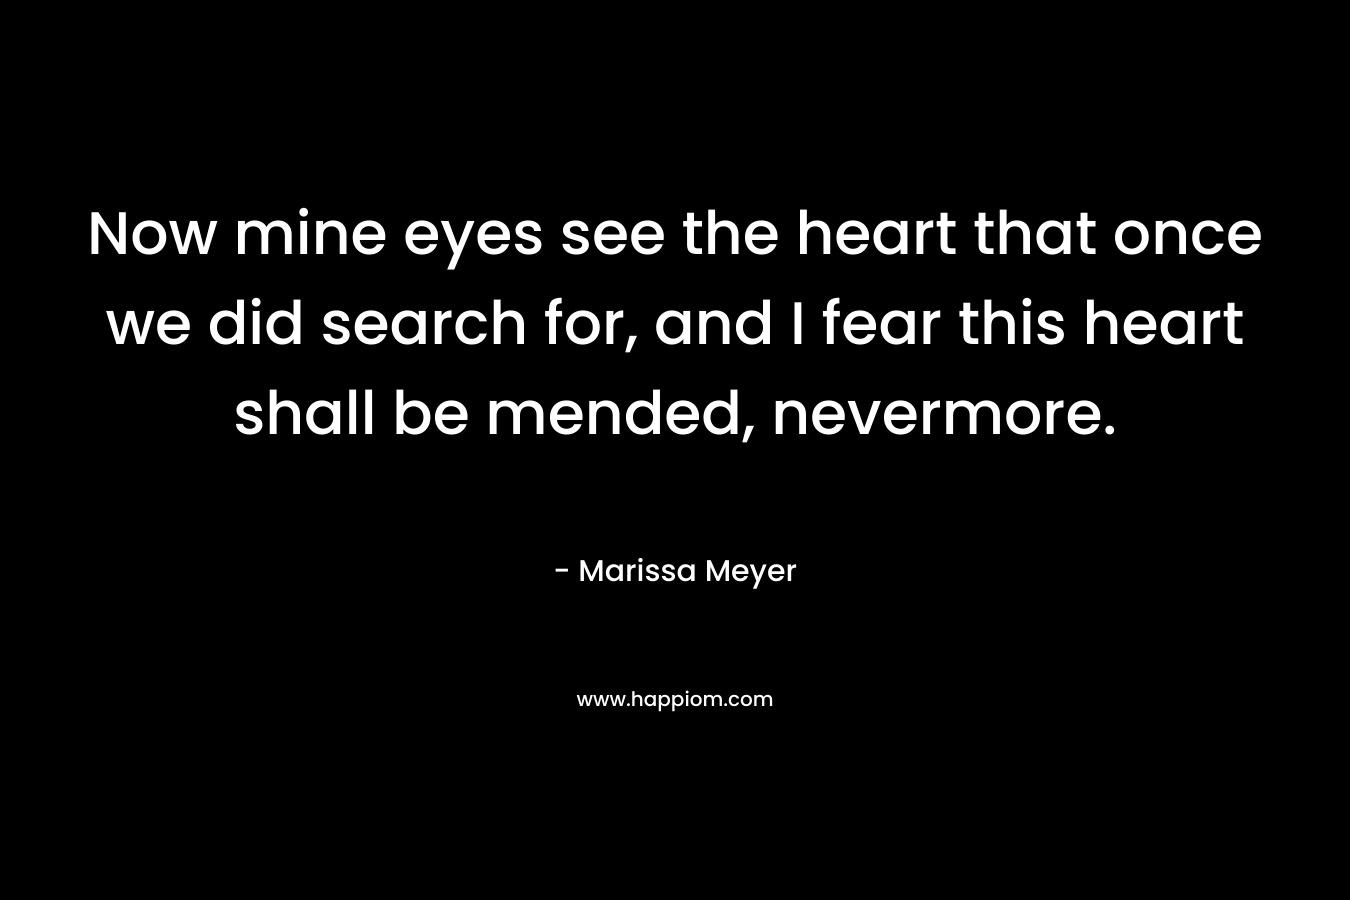 Now mine eyes see the heart that once we did search for, and I fear this heart shall be mended, nevermore.